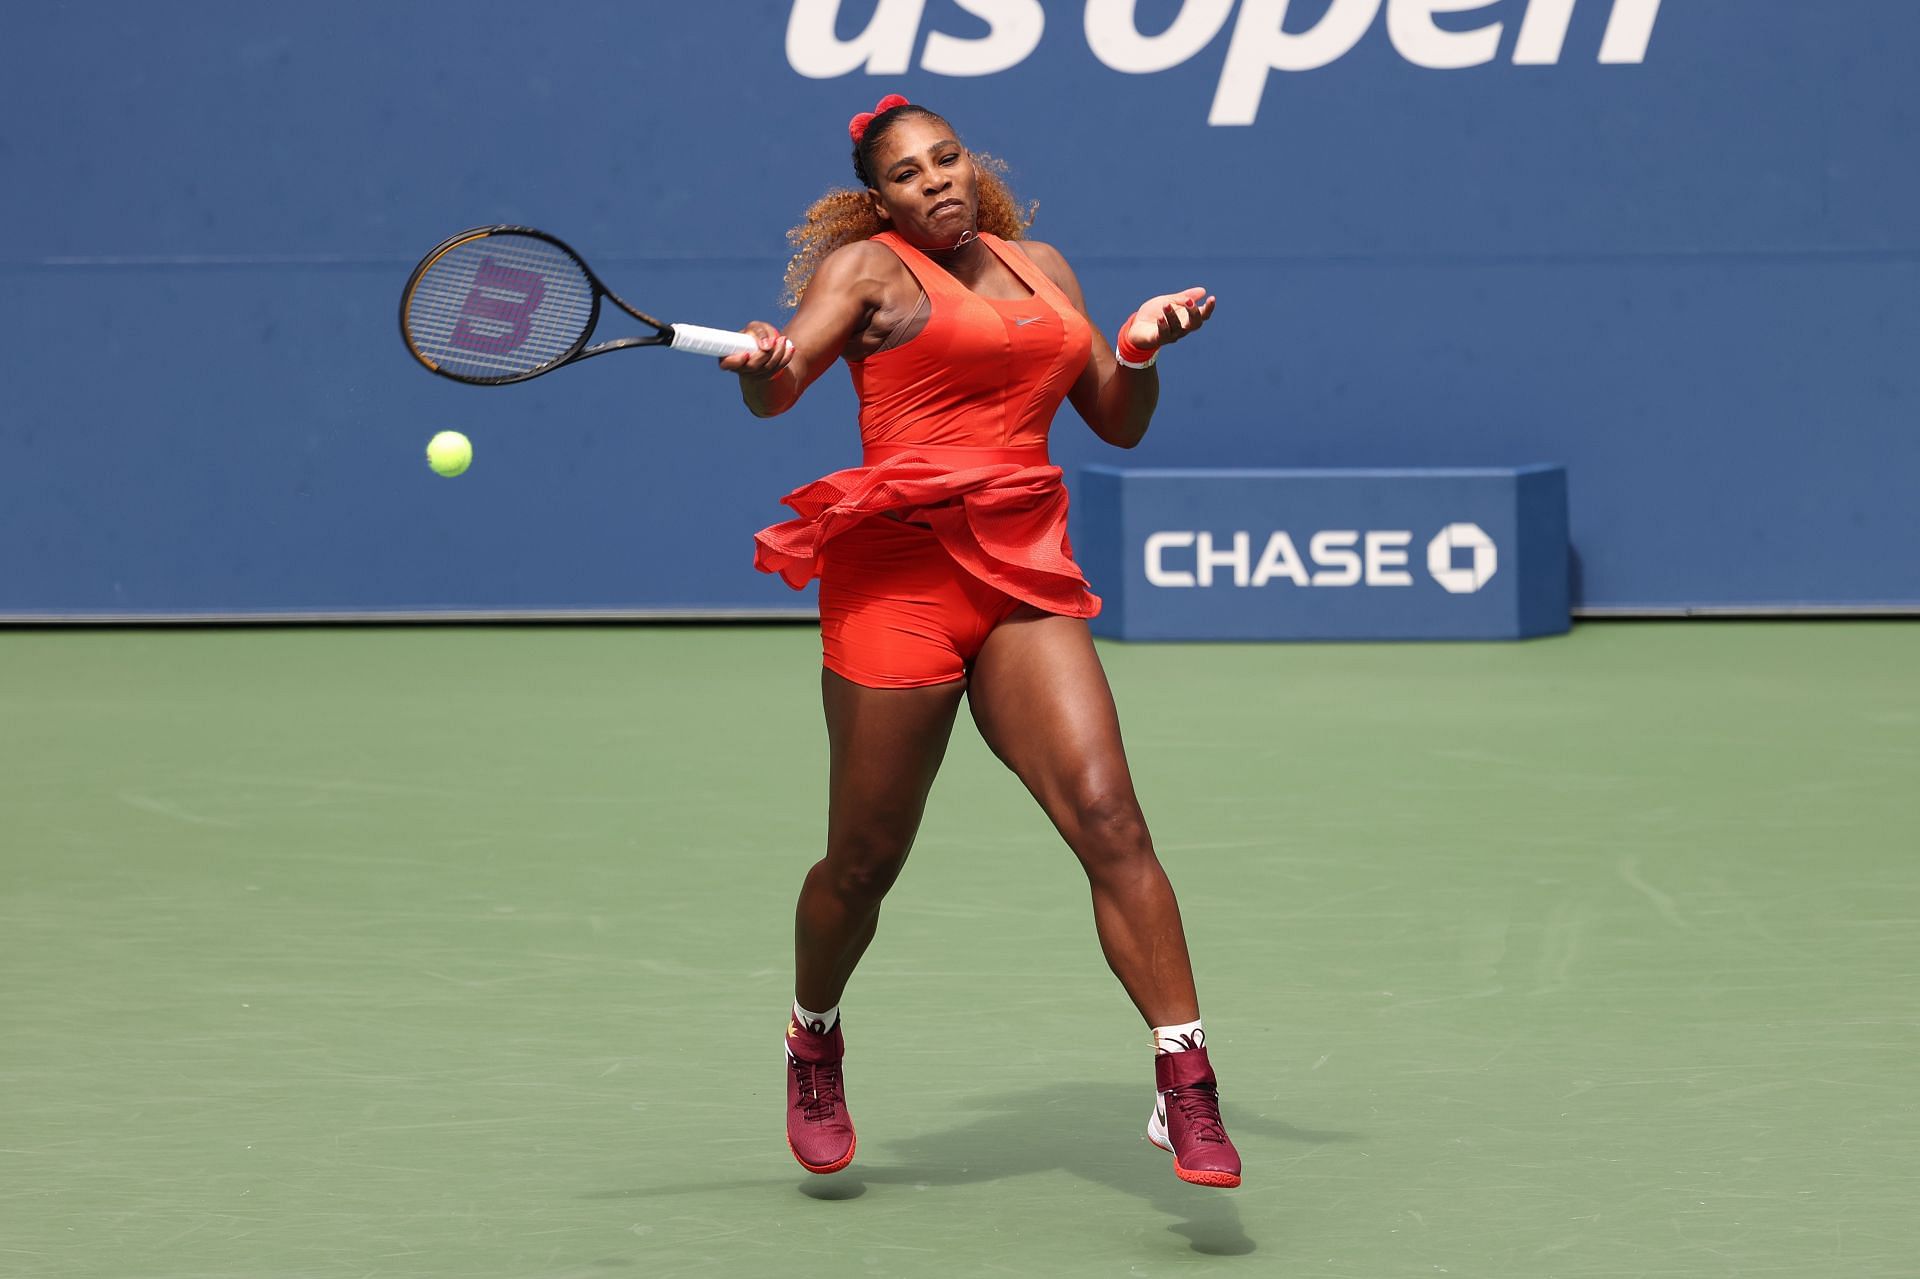 Serena Williams is a six-time US Open champion